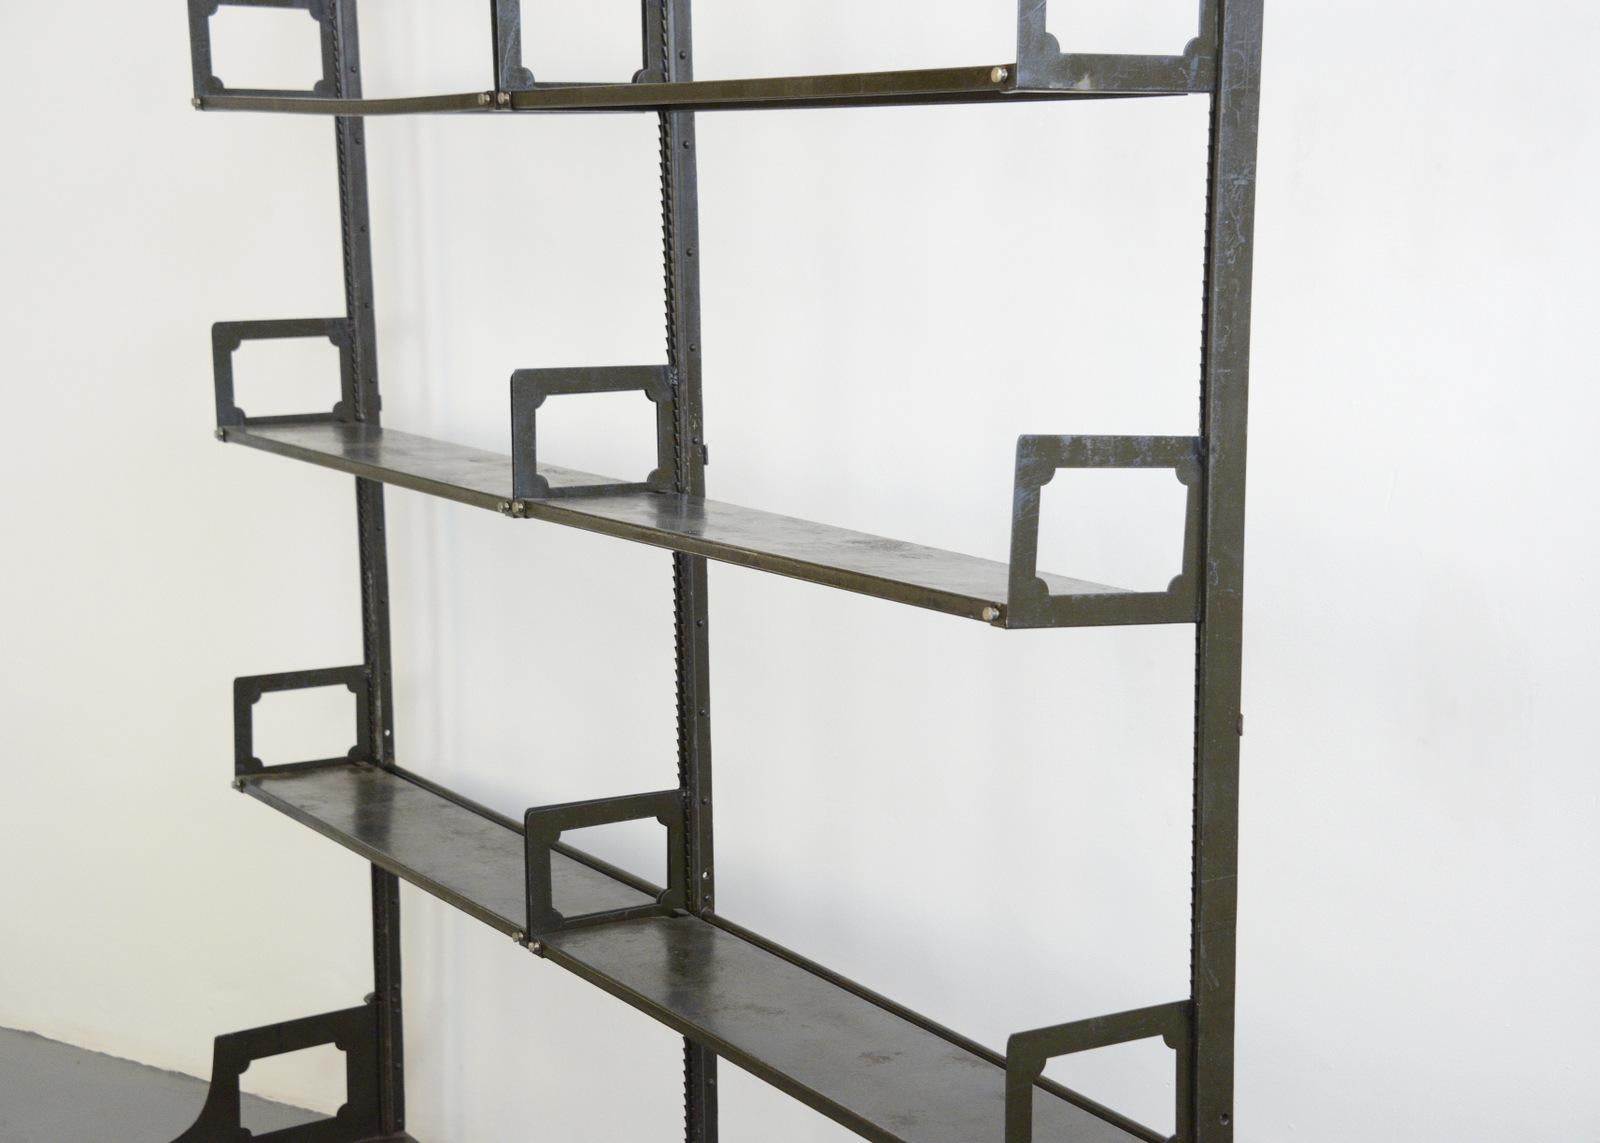 Industrial Shelving by Strafor, circa 1920s

- Cast iron feet
- Original dark green paint
- Steel frame and shelves
- By Strafor, Strasbourg
- French, 1920
- Measures: 201cm wide x 41cm deep x 222cm tall

Please note the shelves will come